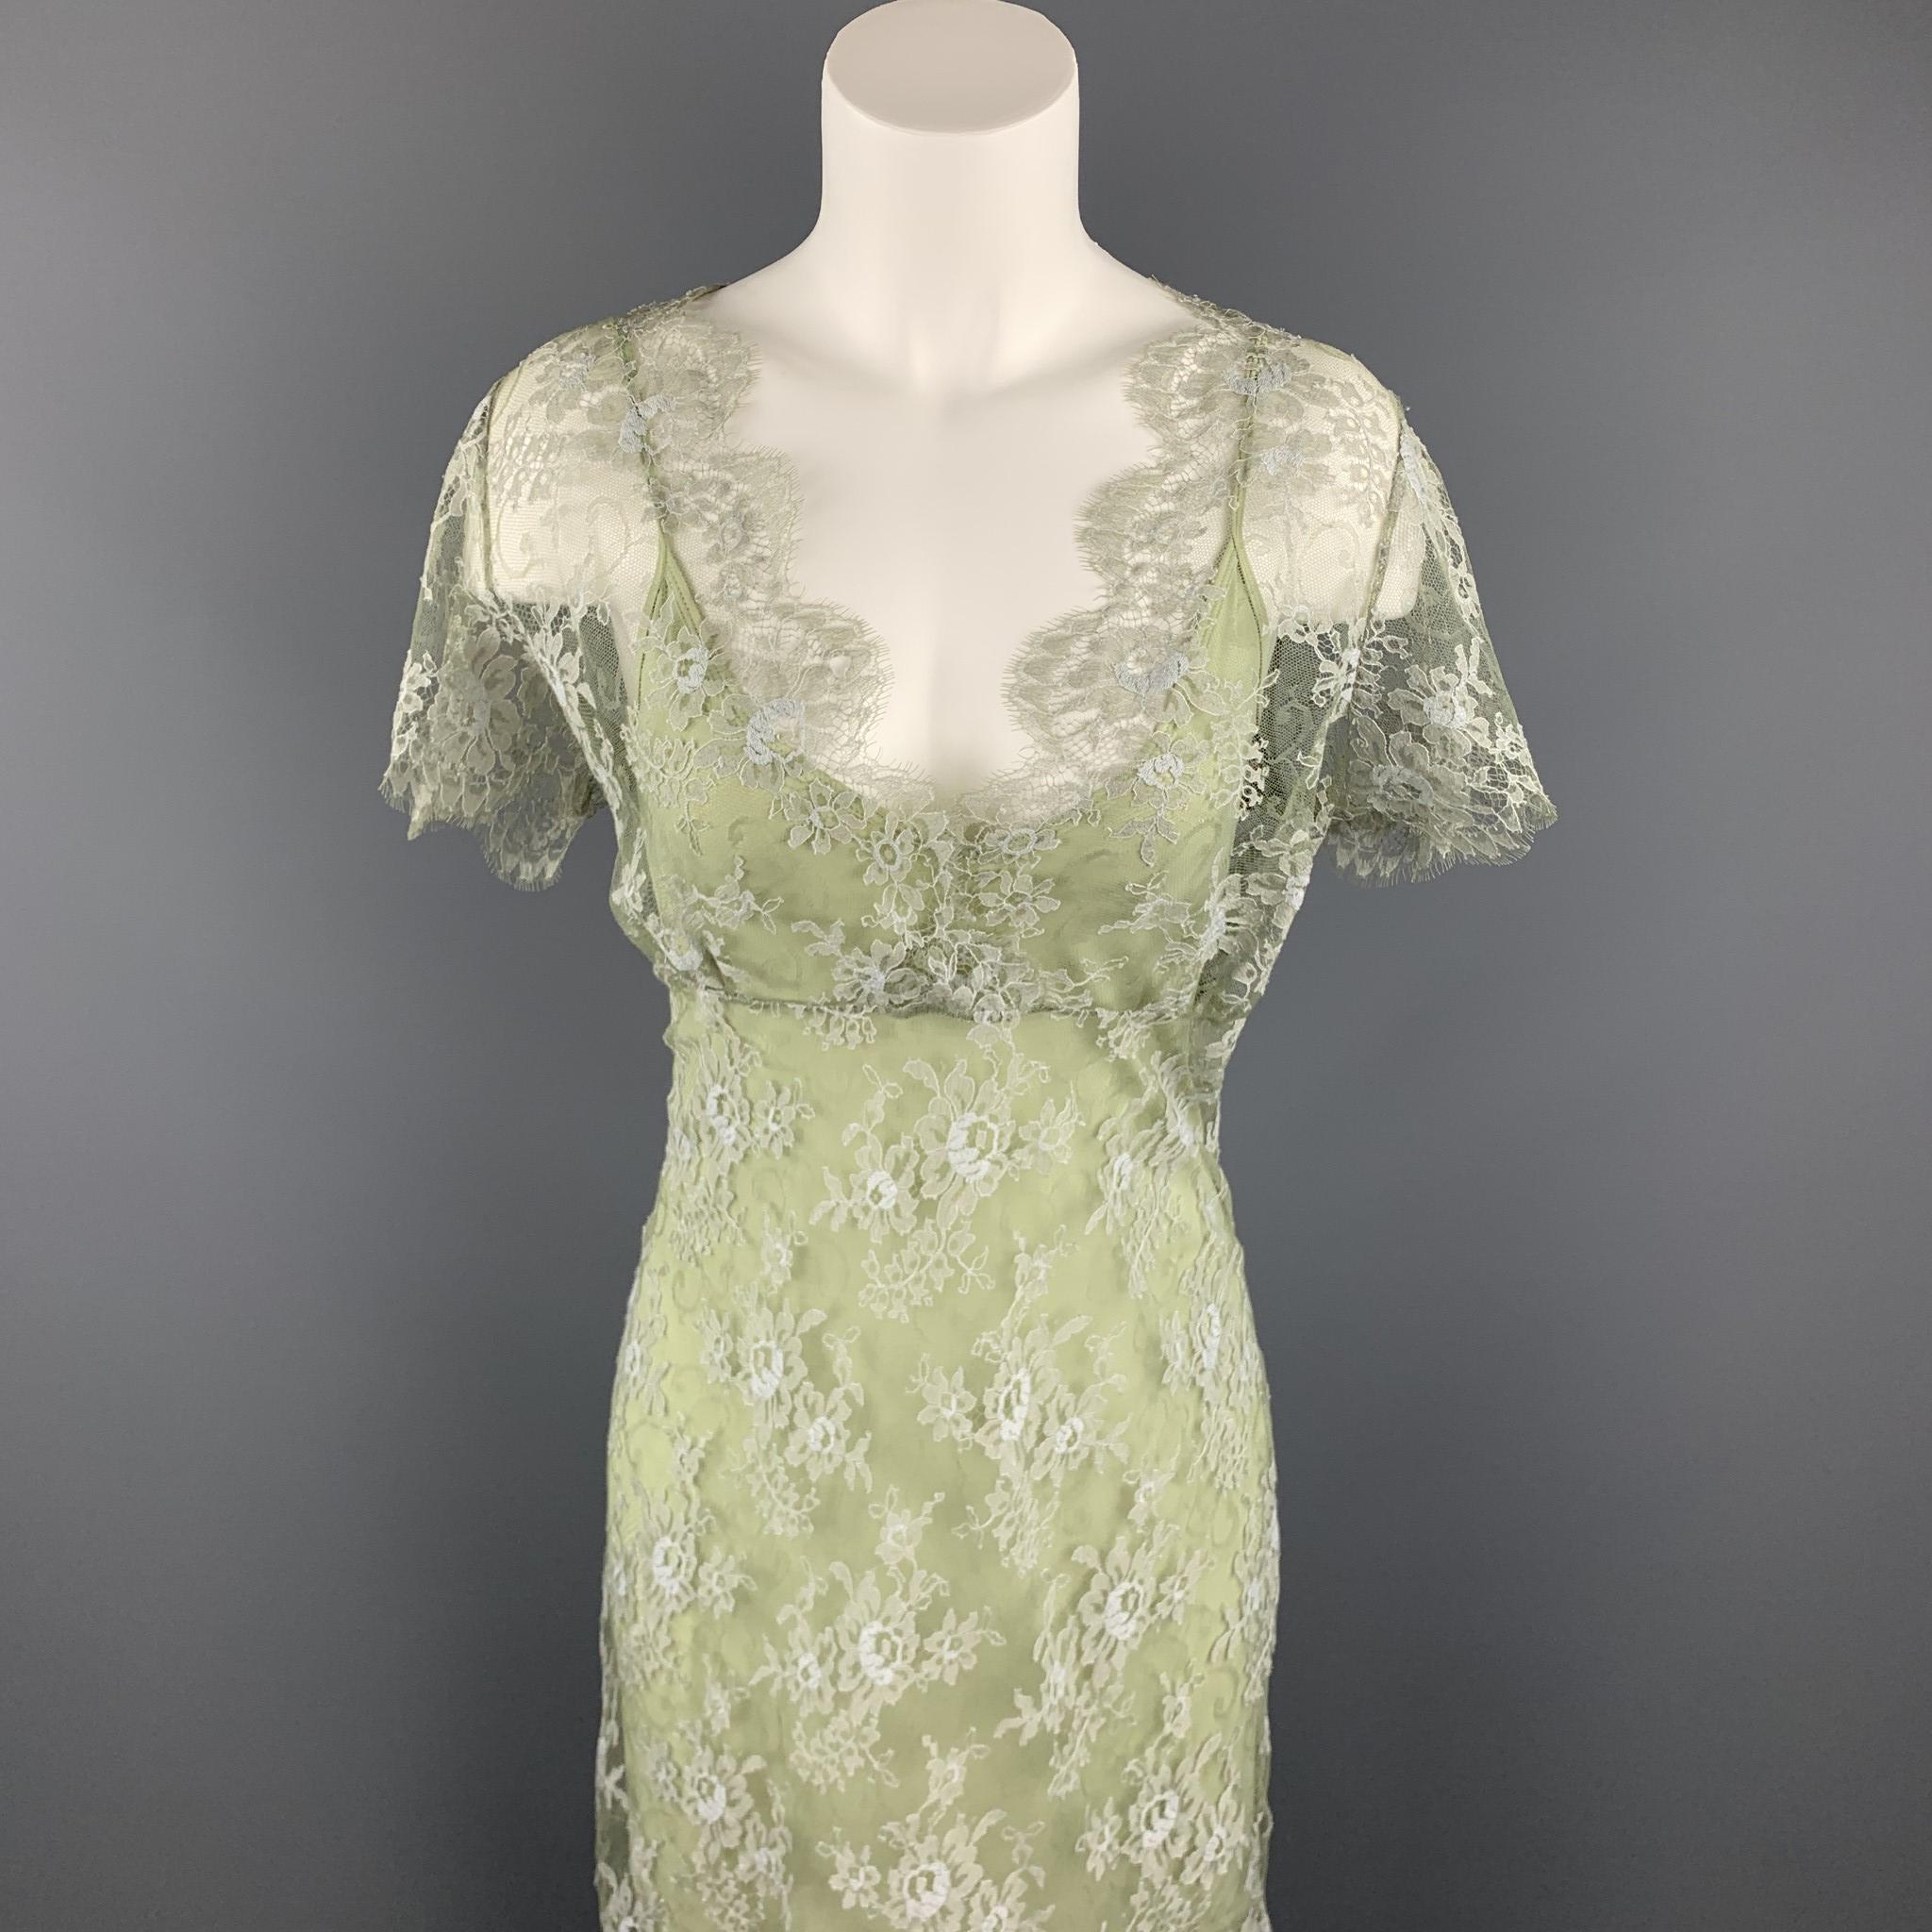 COLLETTE DINNIGAN cocktail dress comes in a green lace nylon / spandex with a lined body, a-line shift silhouette, v-neck, and short sleeves. Made in Australia.

Excellent Pre-Owned Condition.
Marked: L

Measurements:

Shoulder: 16 in. 
Bust: 38 in.